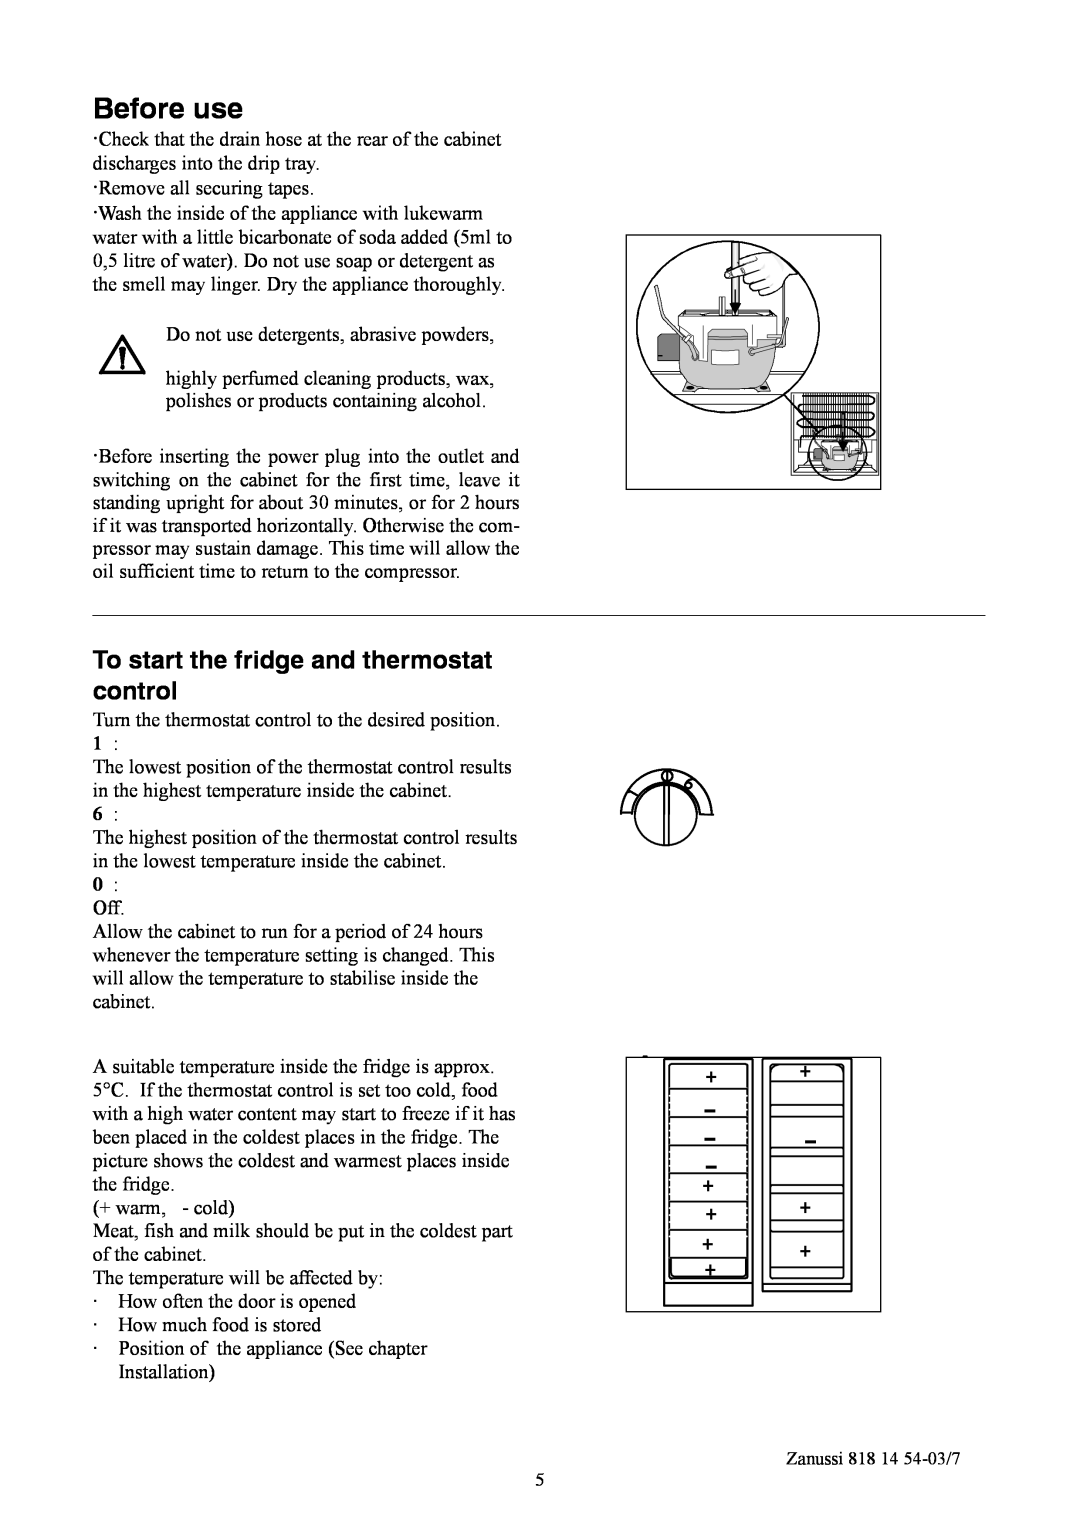 Zanussi ZCR135R manual Before use, To start the fridge and thermostat control 